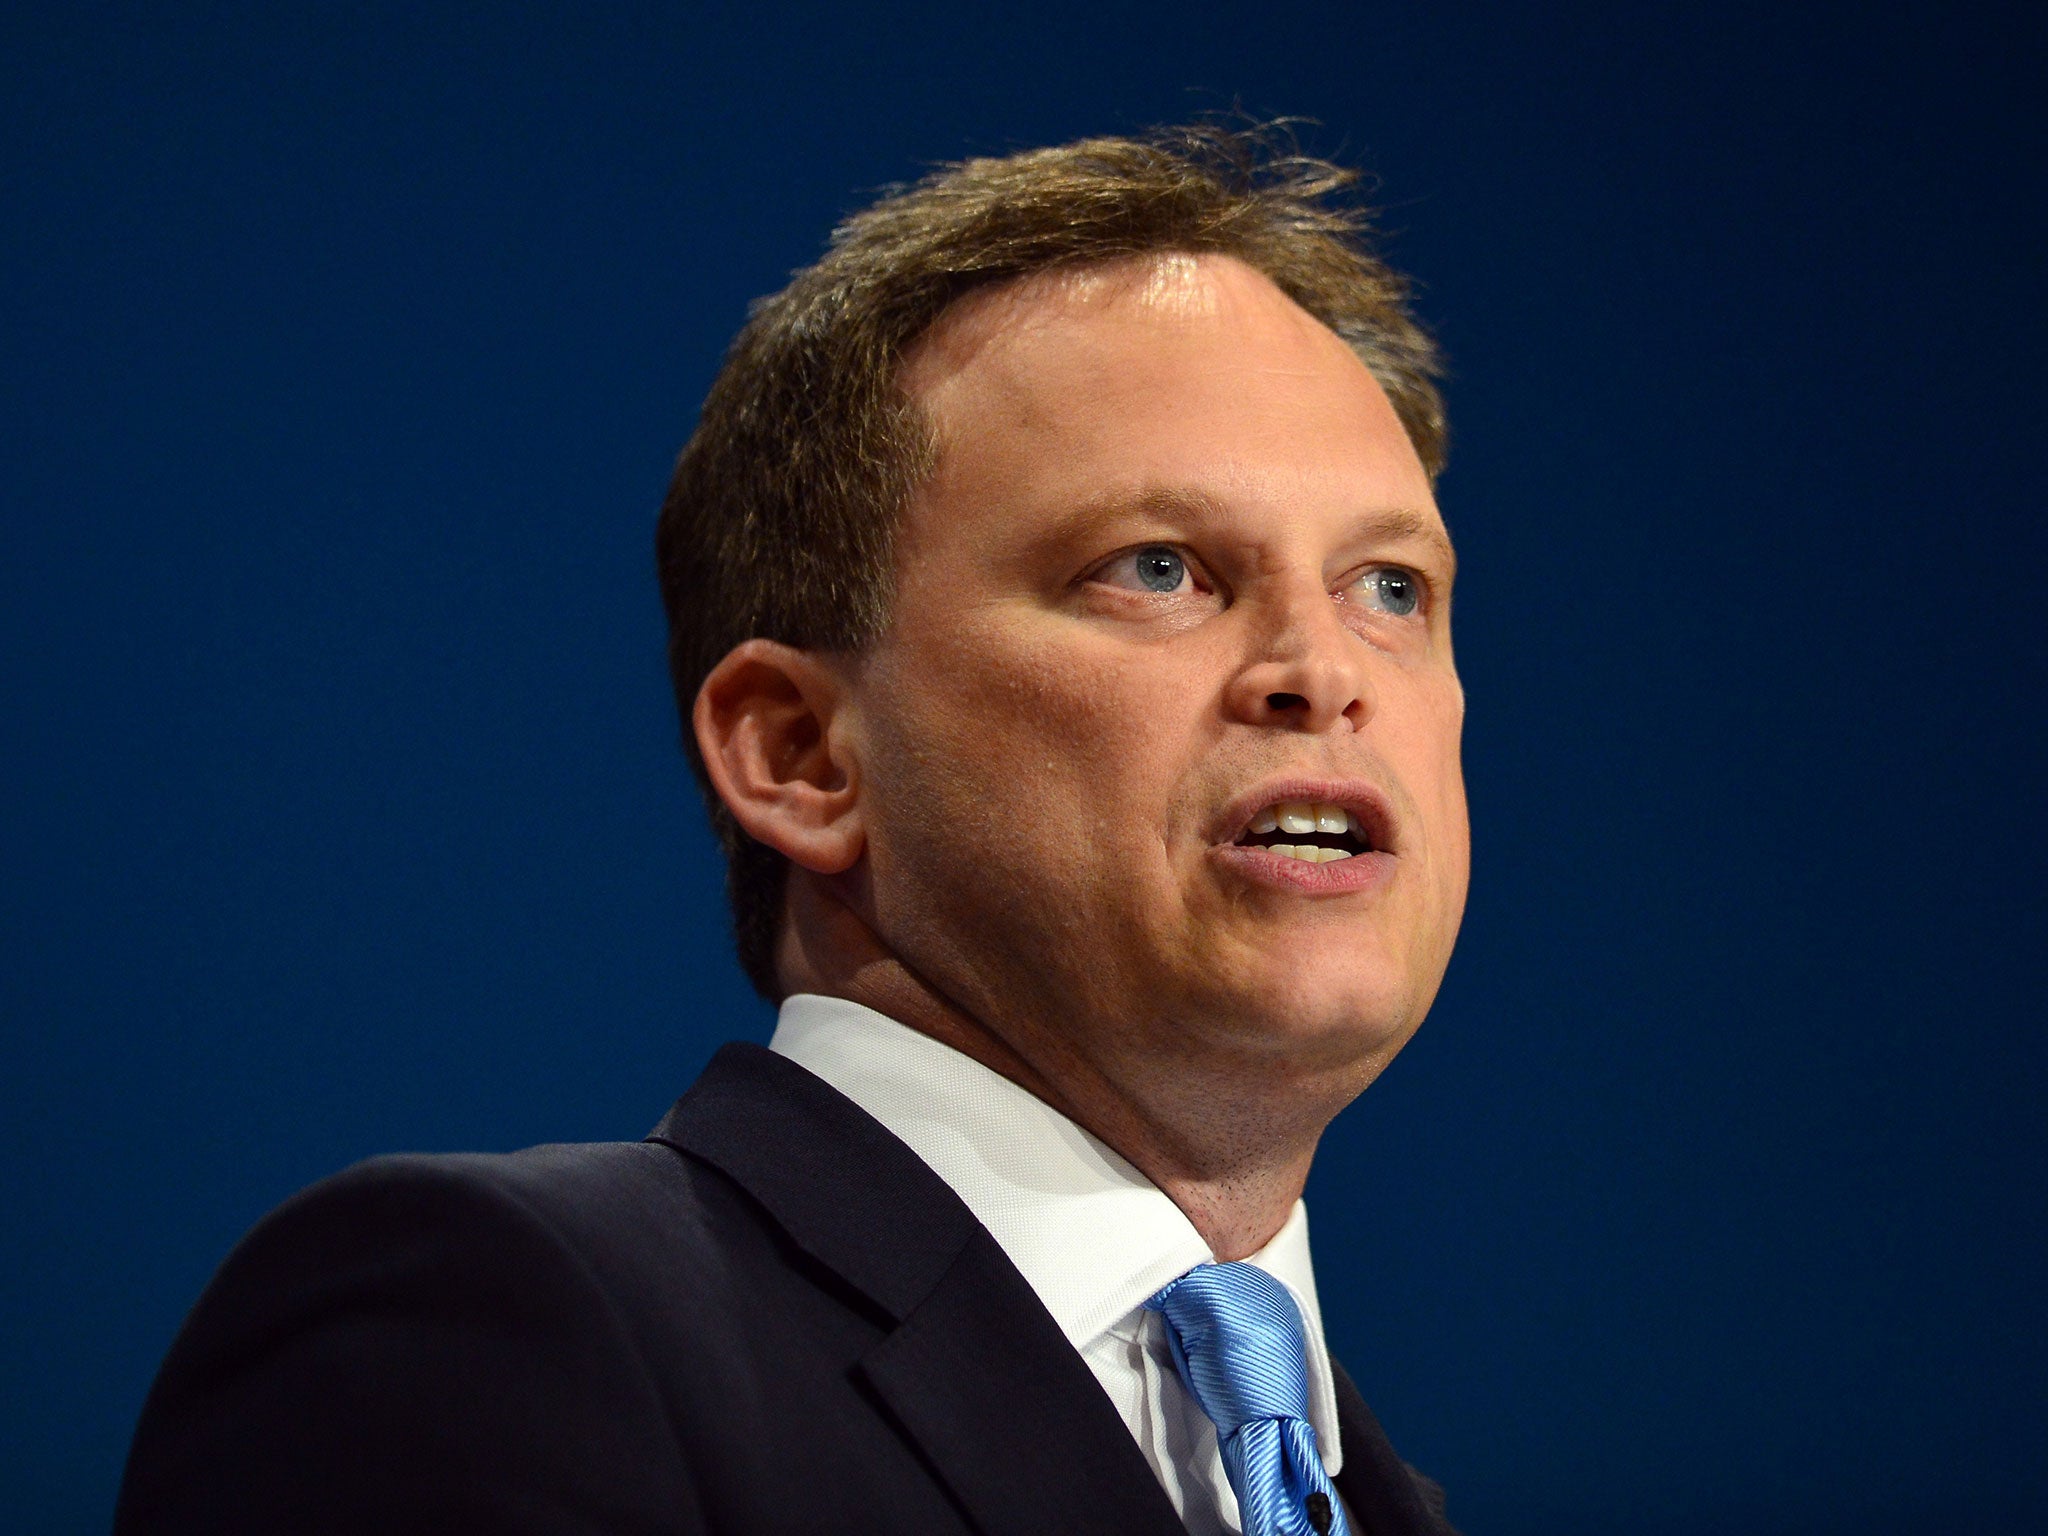 The Tory chairman Grant Shapps sold his 'toolkit' of secrets for £130 (Getty)